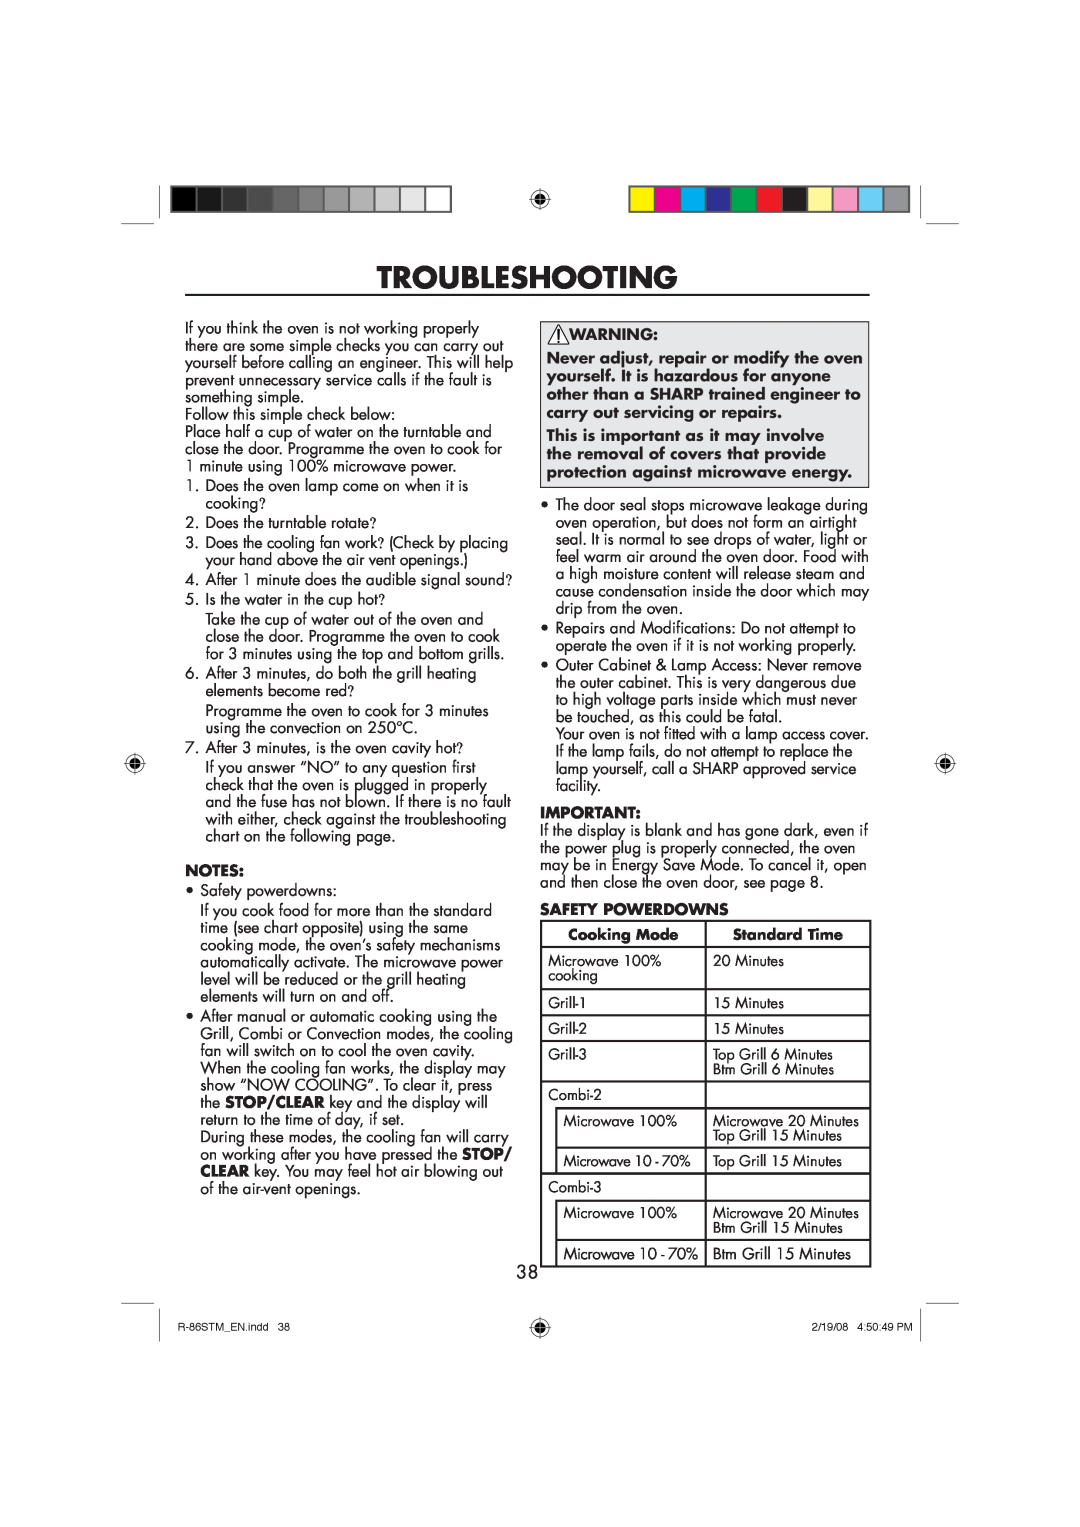 Sharp R-86STM manual Troubleshooting, Safety Powerdowns, Cooking Mode, Standard Time 